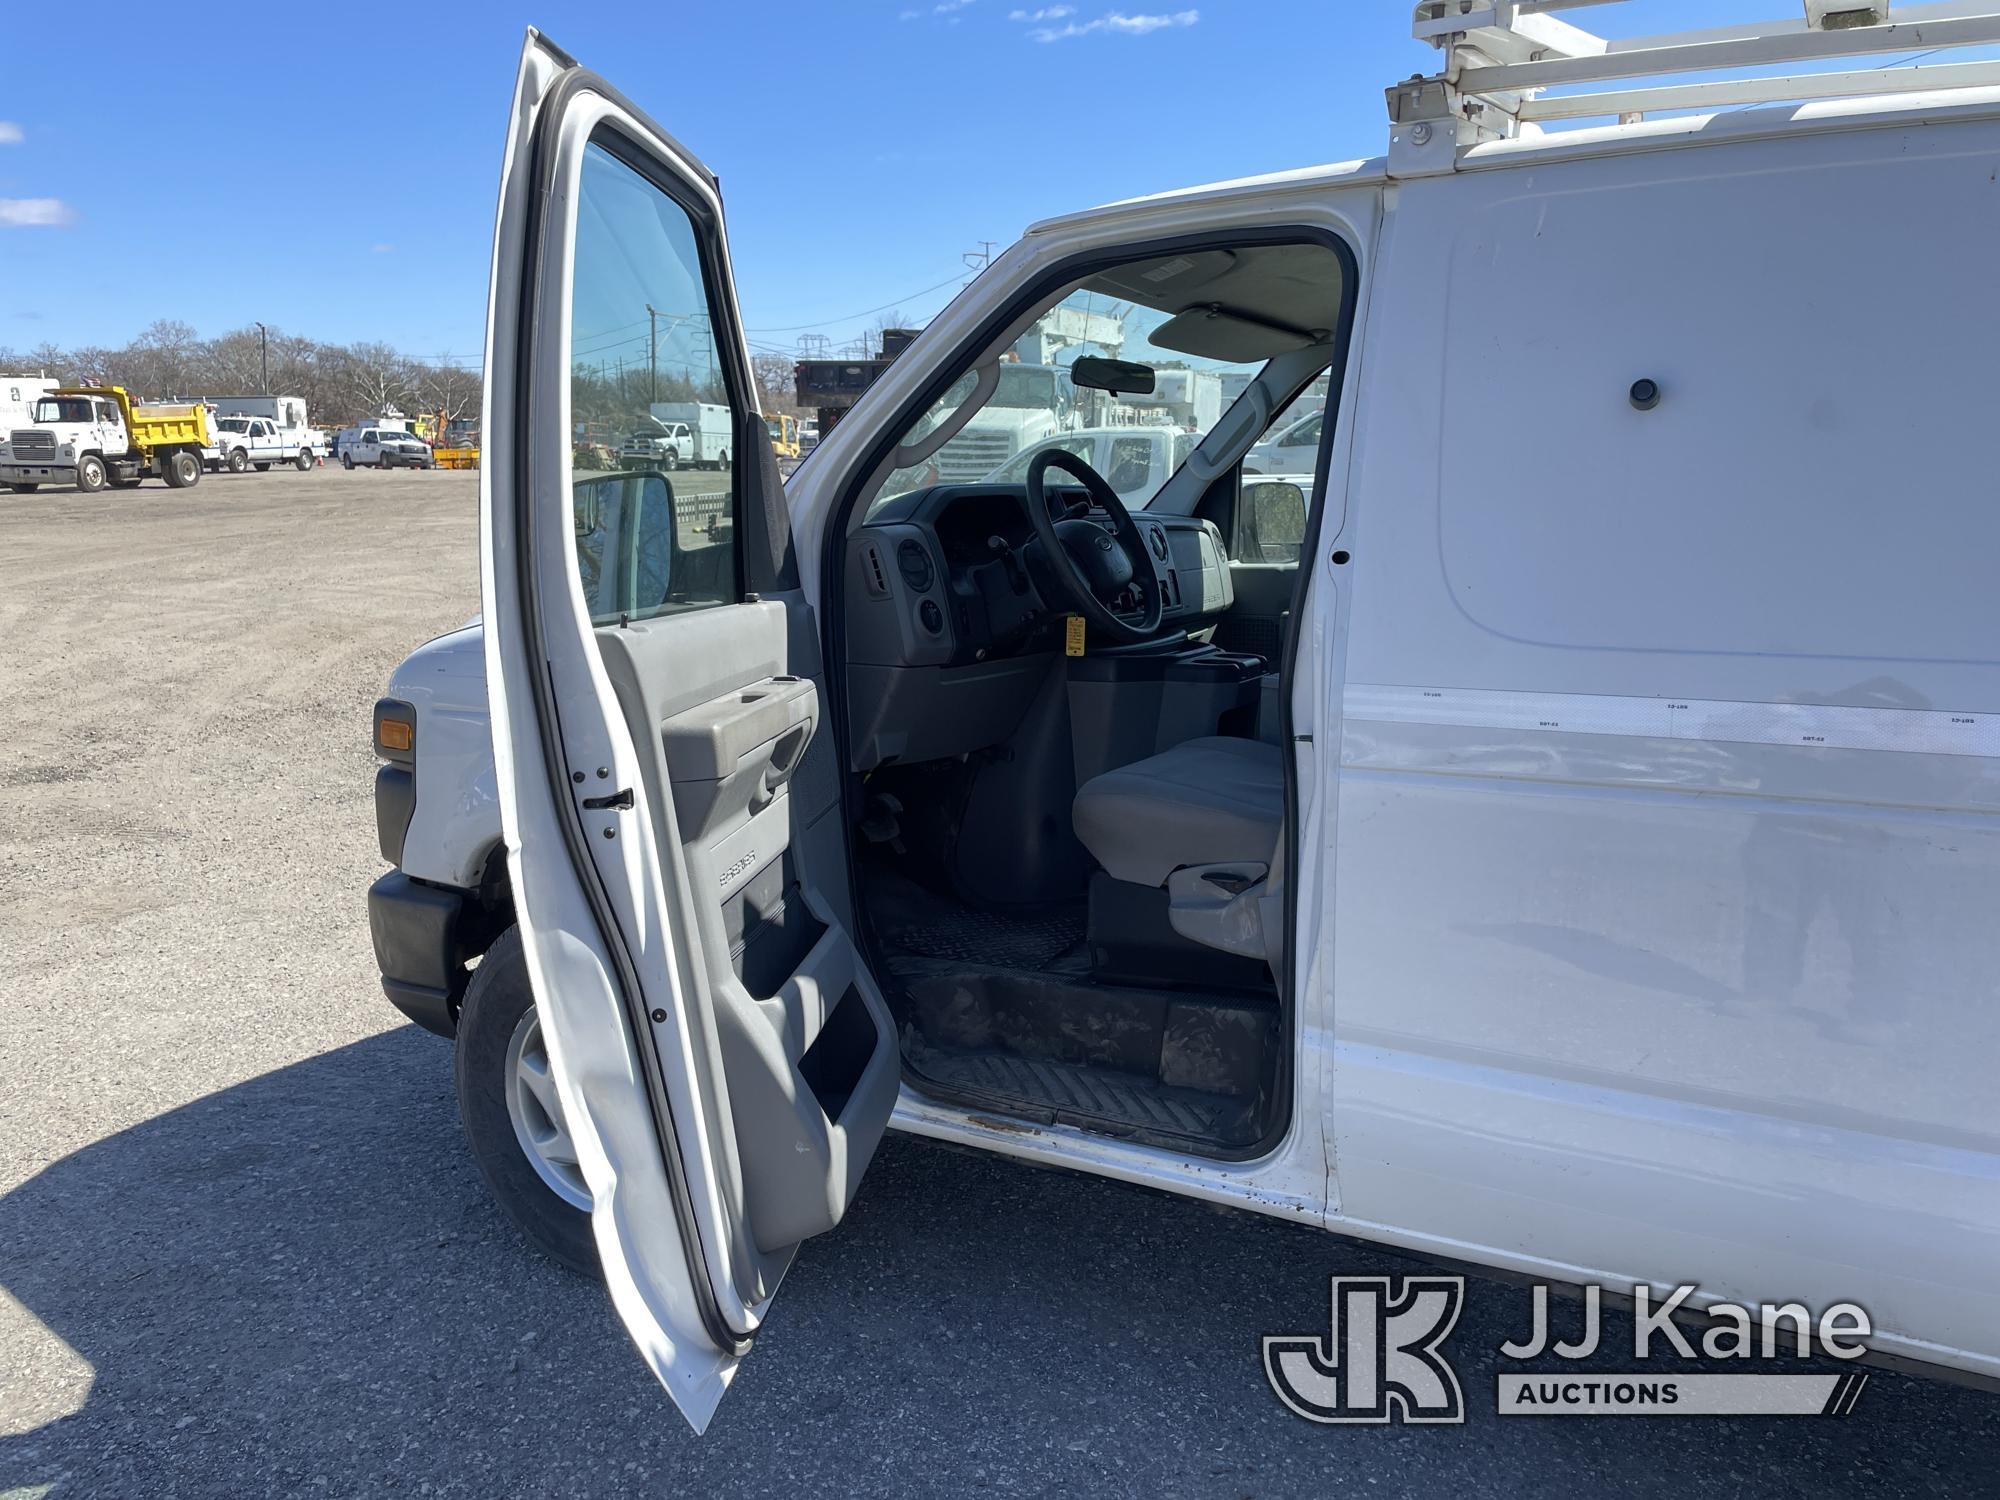 (Plymouth Meeting, PA) 2011 Ford E250 Cargo Van Runs & Moves, Body & Rust Damage, Low Fuel